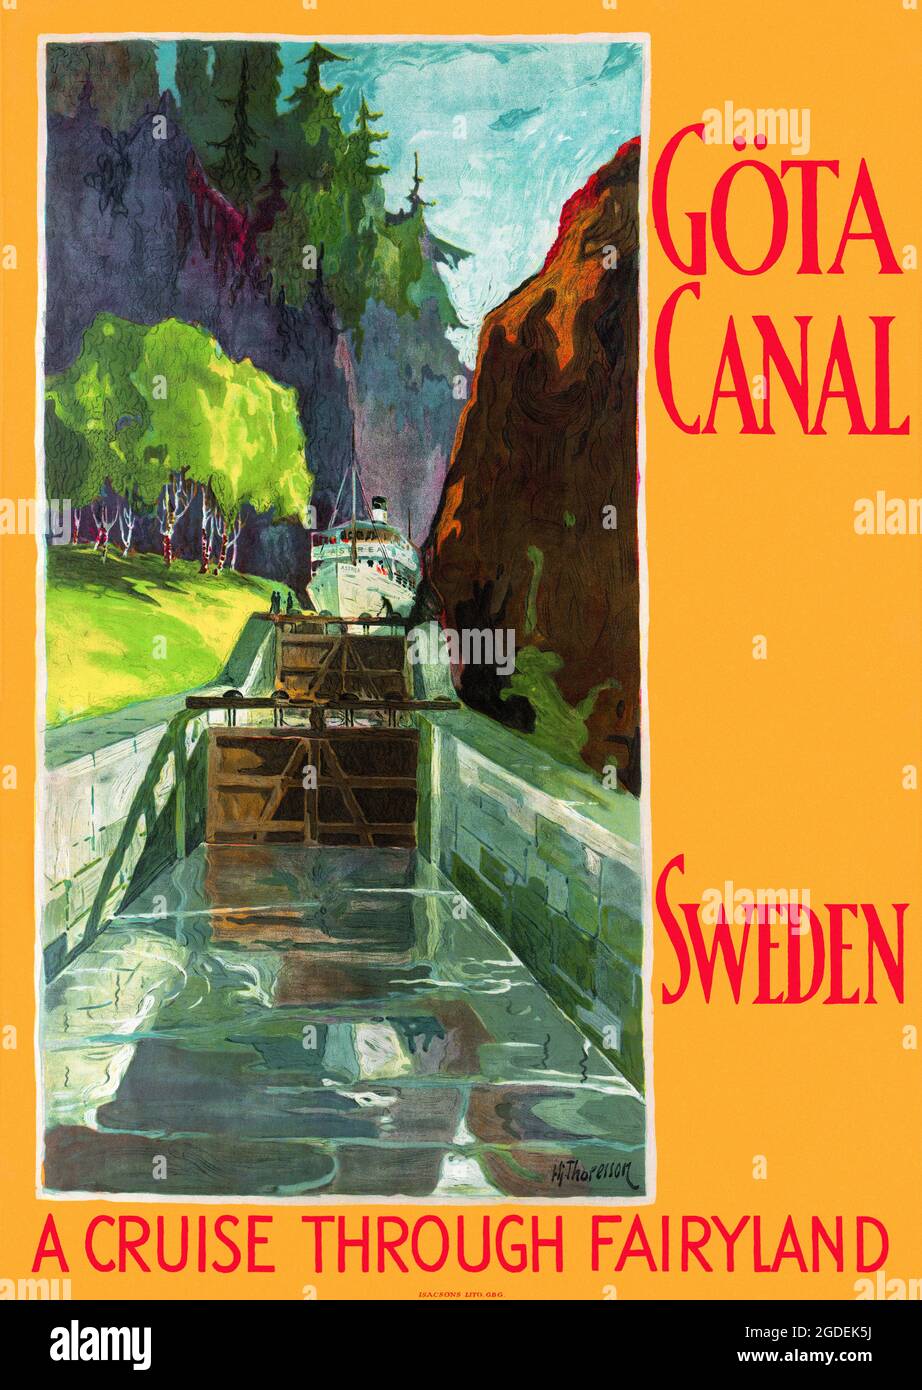 Göta Canal, Sweden. A cruise through fairyland by Hjalmar Thoresson (1893-1943). Restored vintage poster published in 1920 in Sweden. Stock Photo